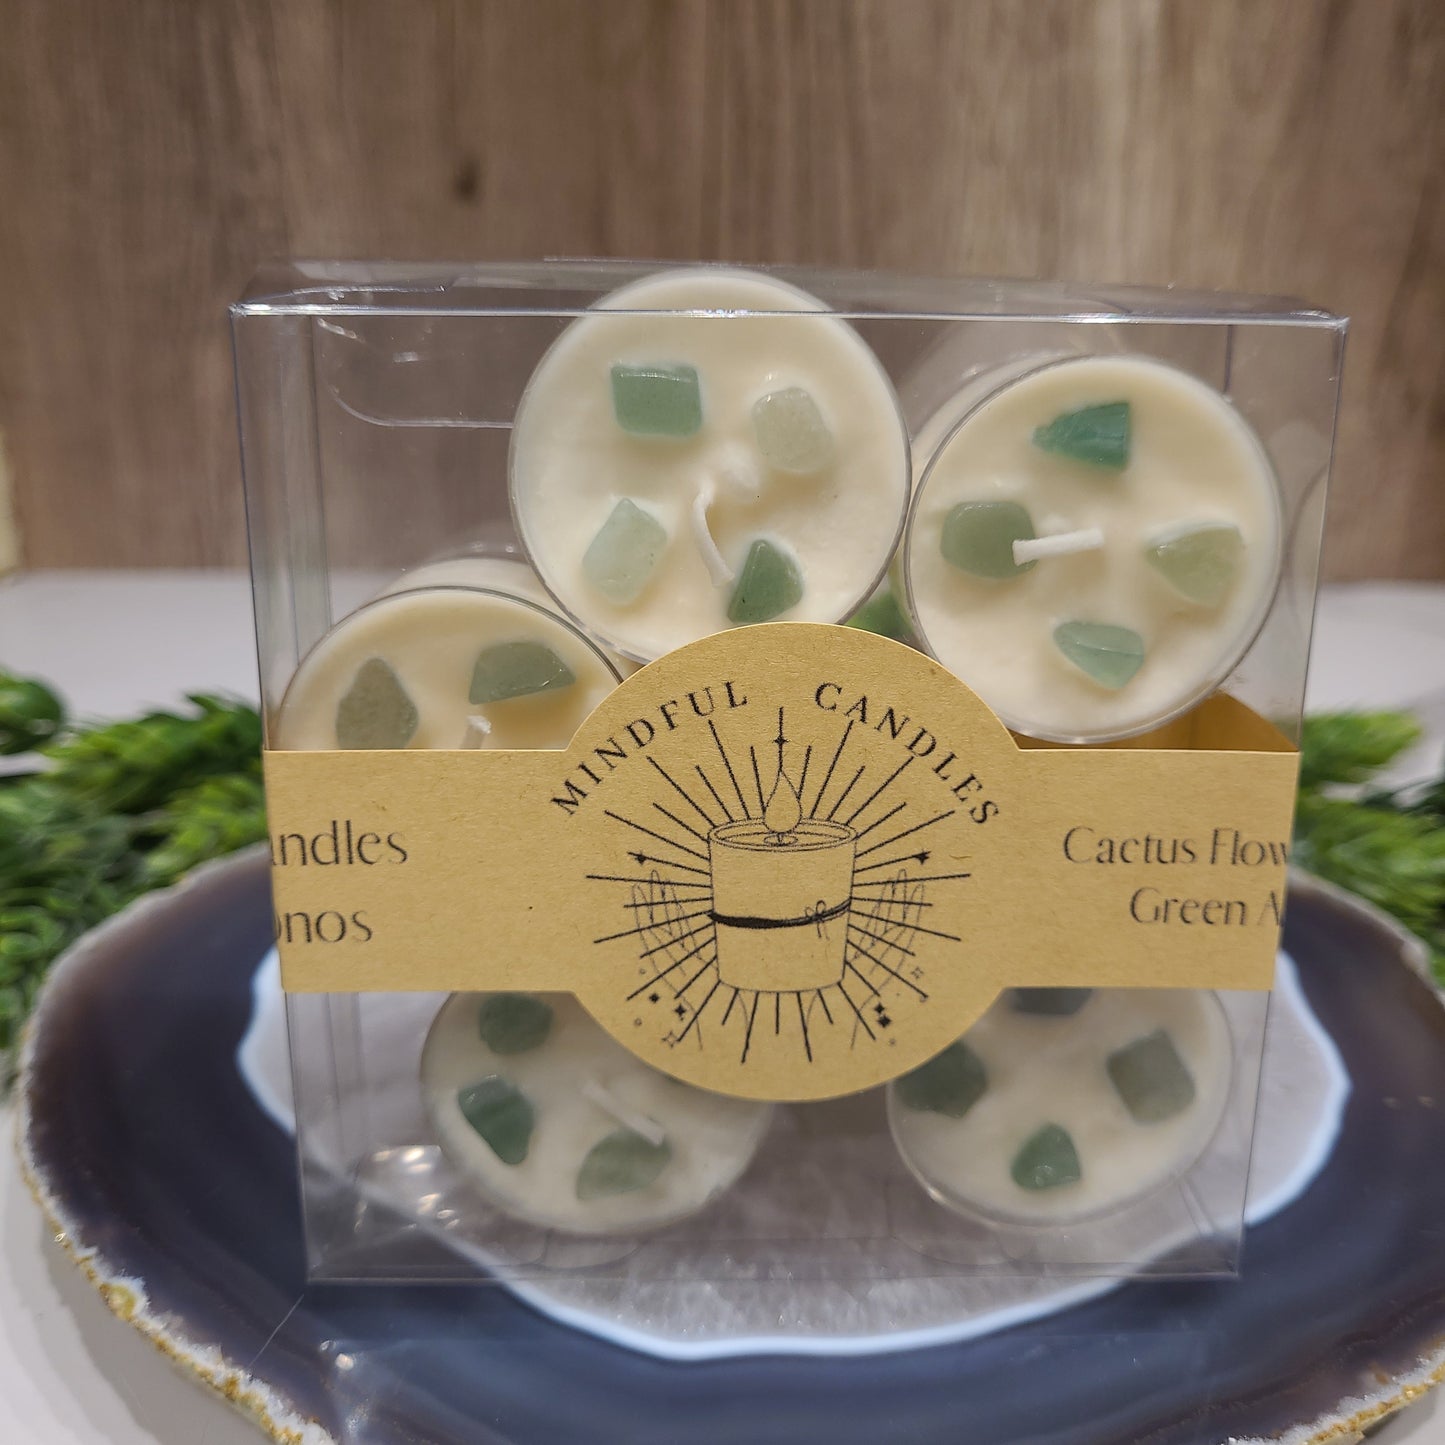 Cactus Flower and Jade Soy Tealight Candles